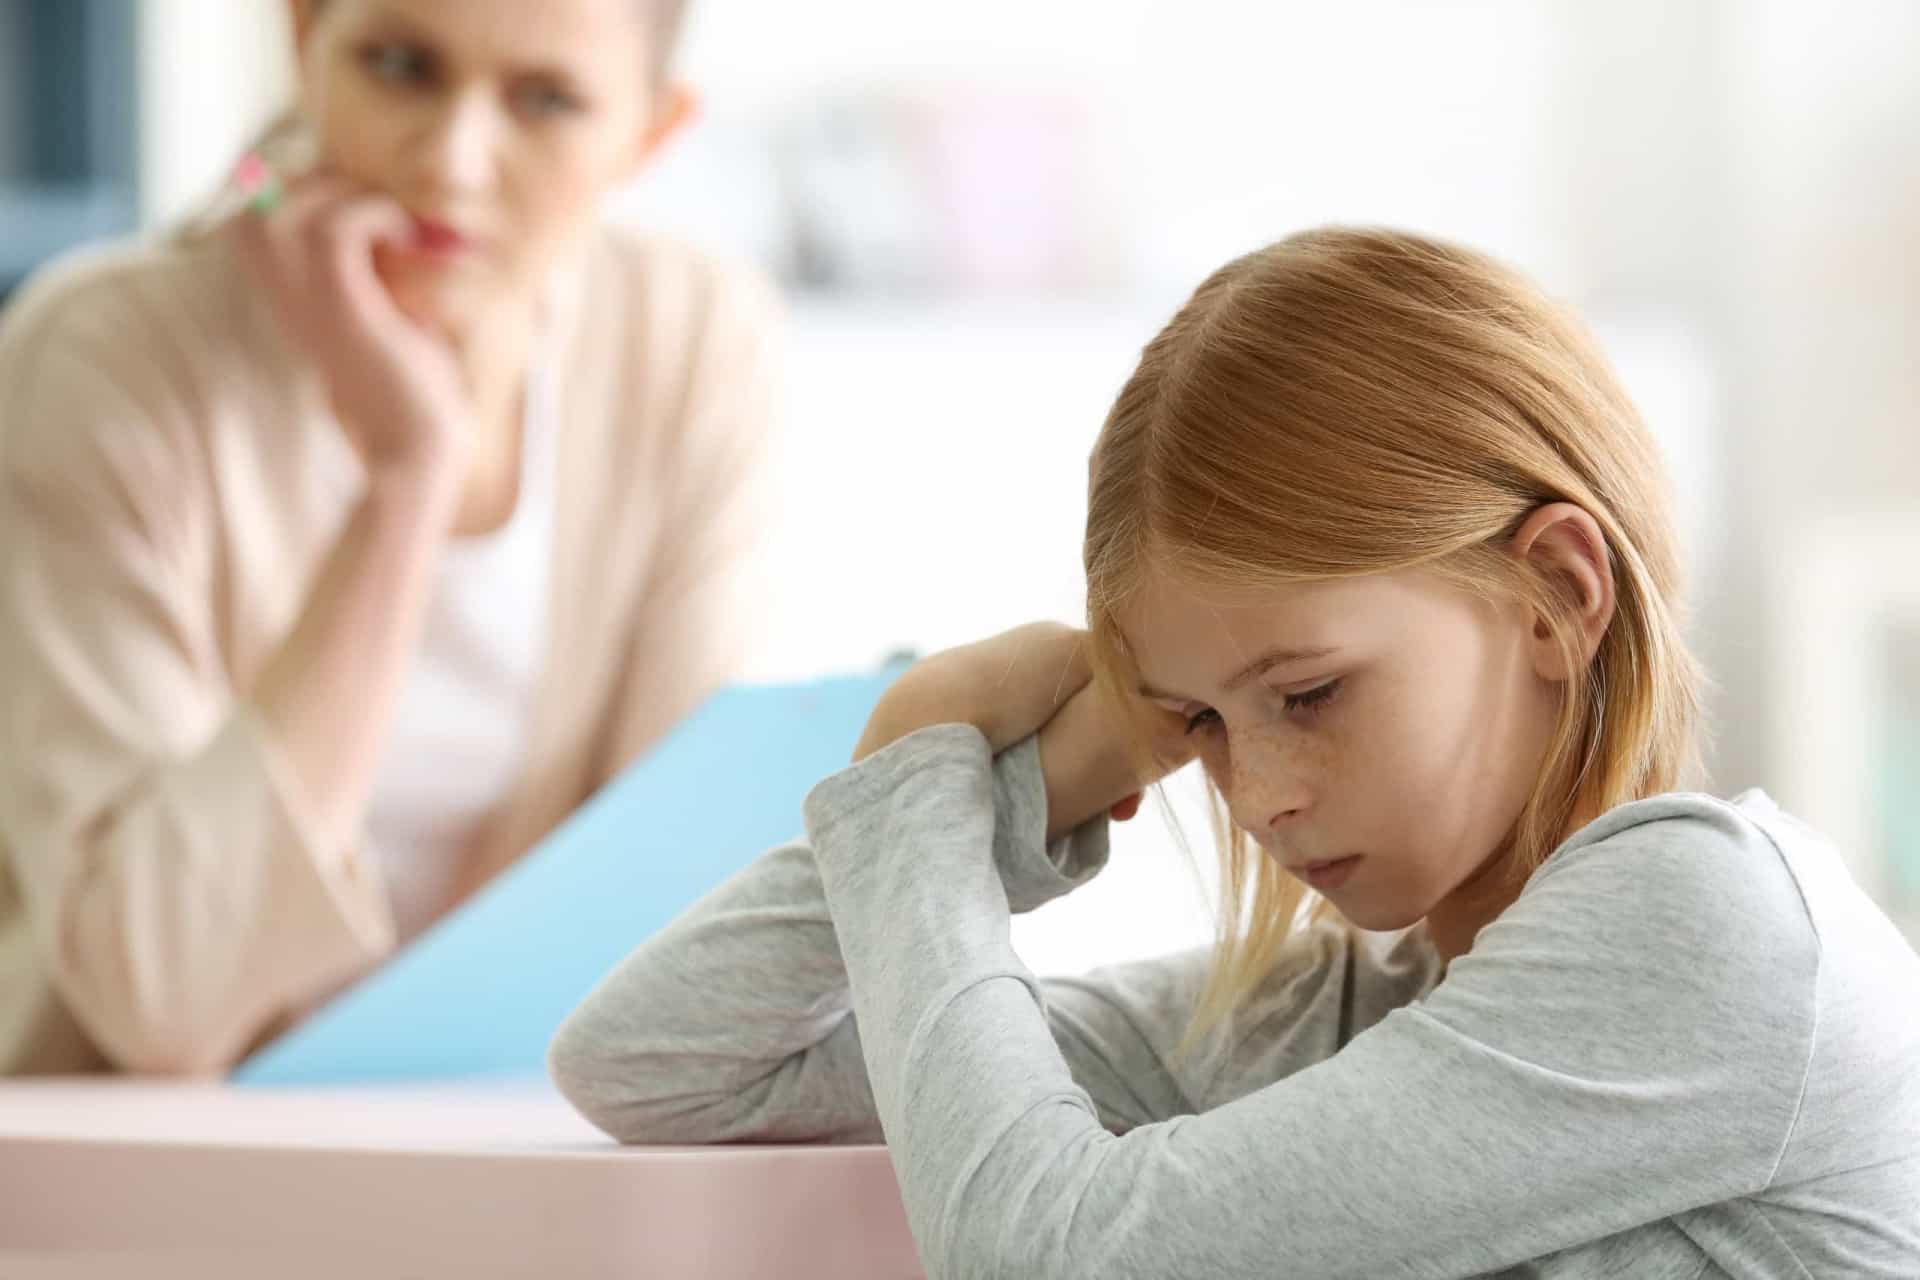 <p><span>The main symptom of selective mutism is a marked contrast in the way a child interacts with different people. </span></p><p>You may also like:<a href="https://www.starsinsider.com/n/204595?utm_source=msn.com&utm_medium=display&utm_campaign=referral_description&utm_content=521574en-sg"> Fascinating facts that will change how you see 'The Sixth Sense'</a></p>